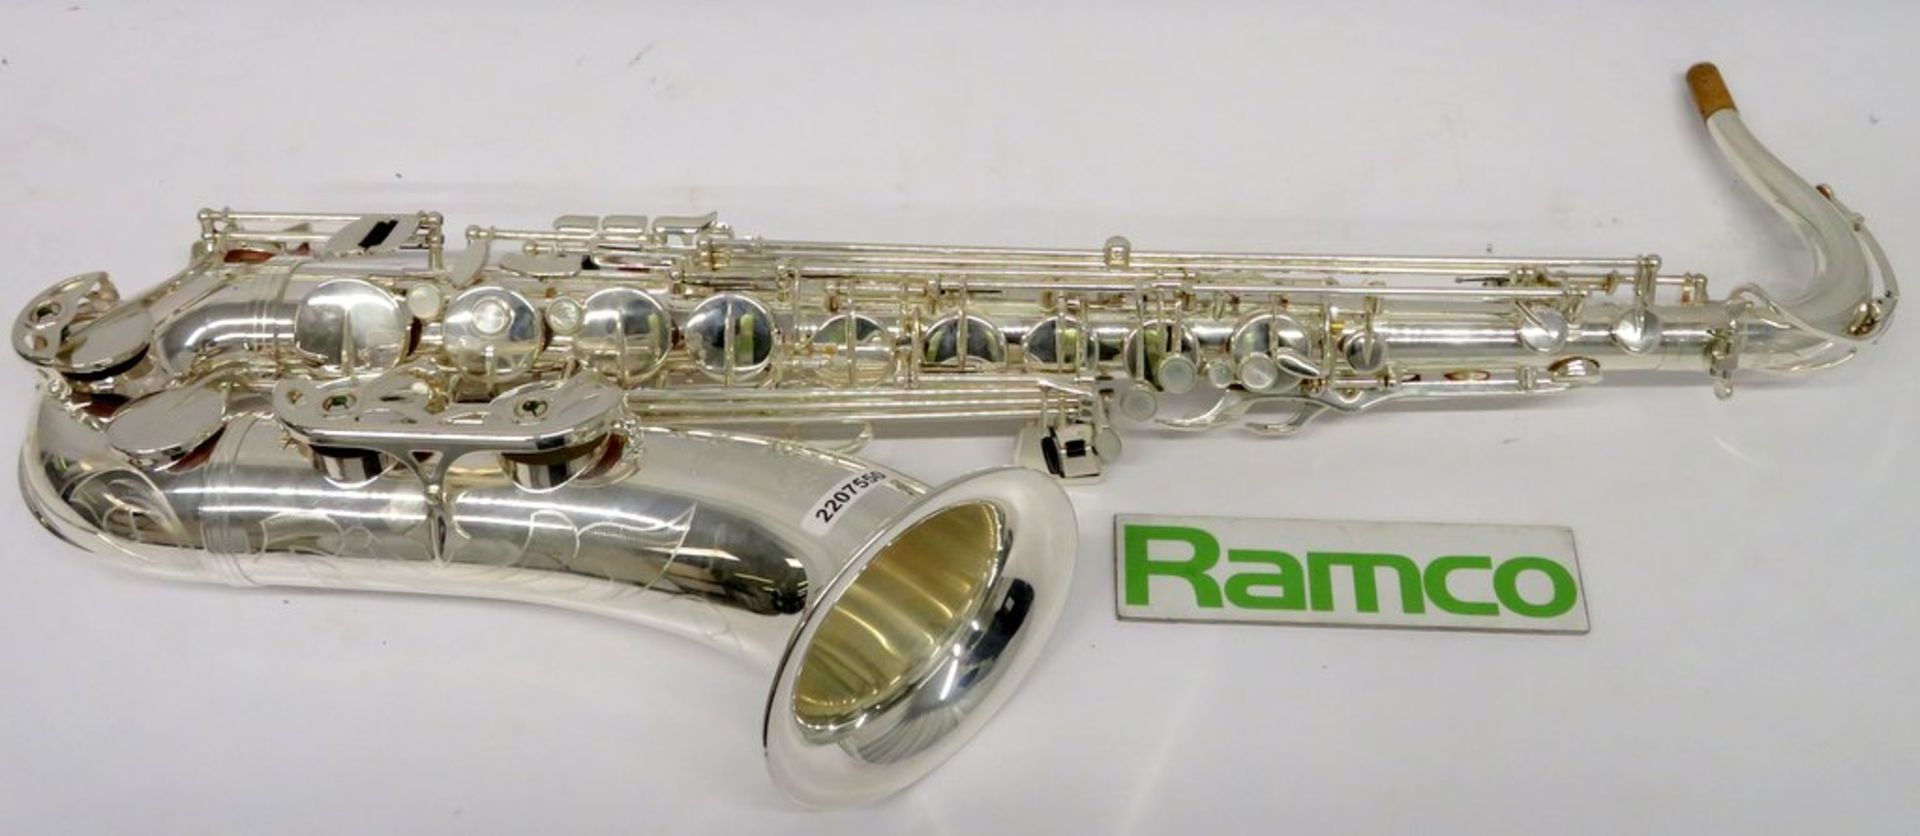 Henri Selmer Super Action 80 Serie 2 Tenor Saxophone With Case. Serial Number: N.607728. - Image 3 of 20